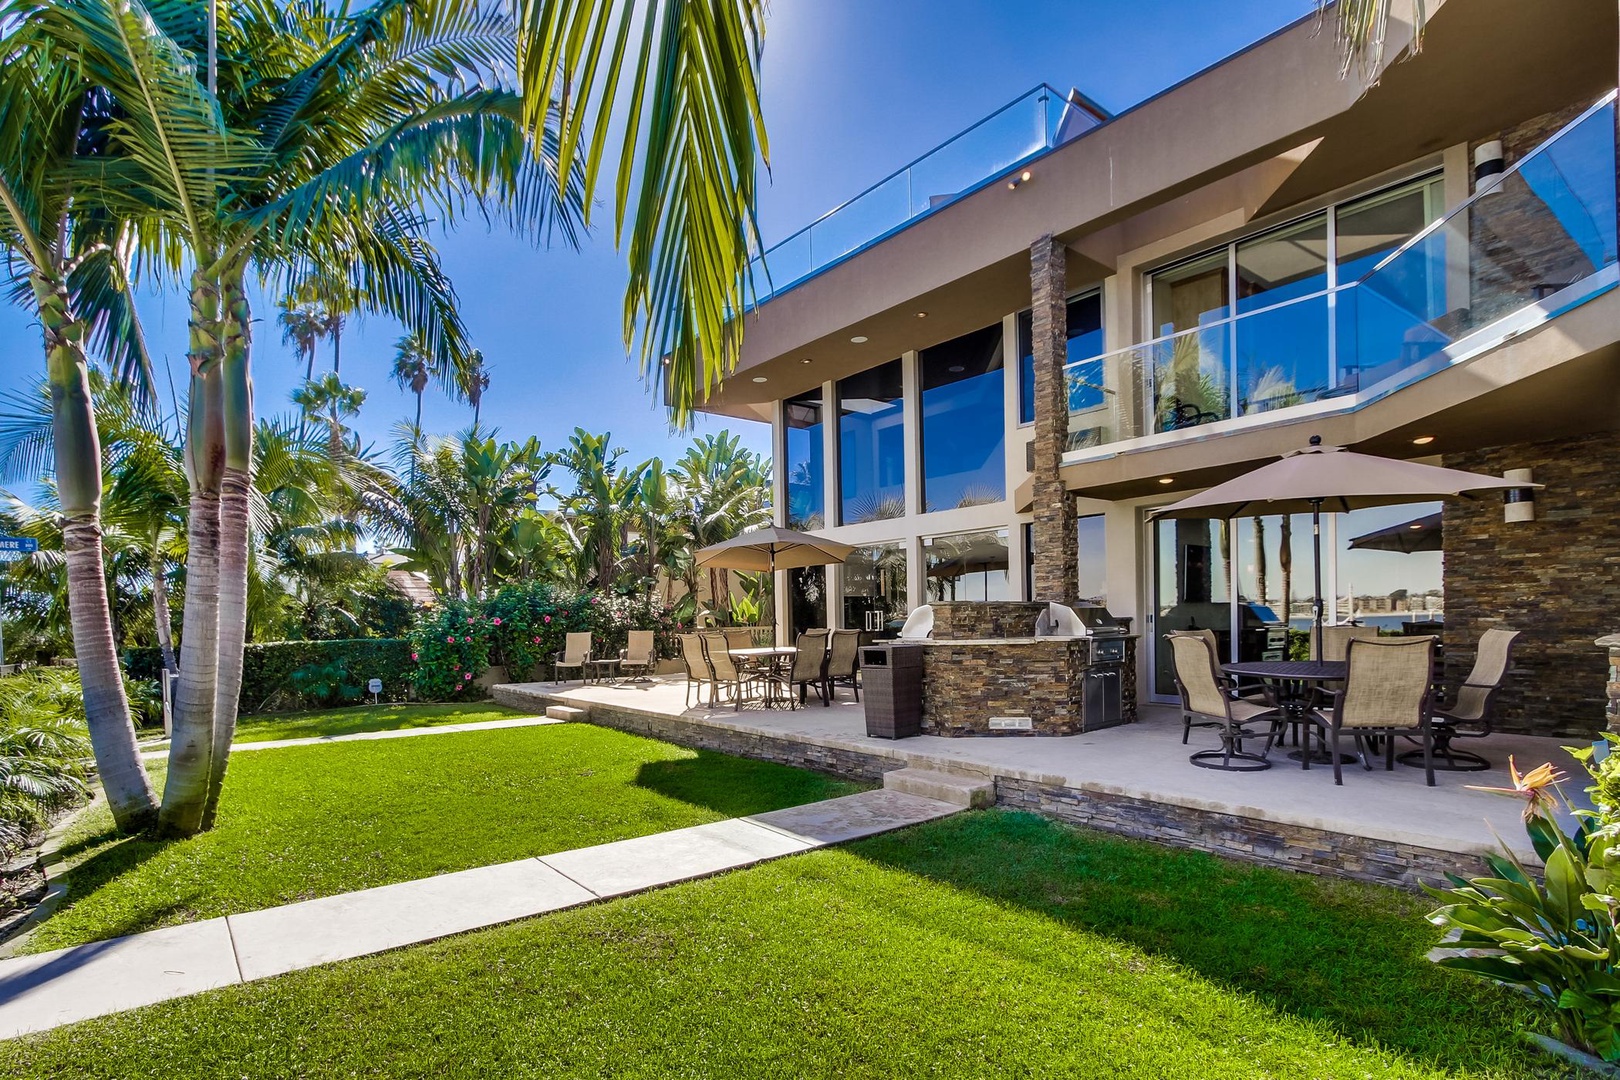 Grass lawn and outdoor dining